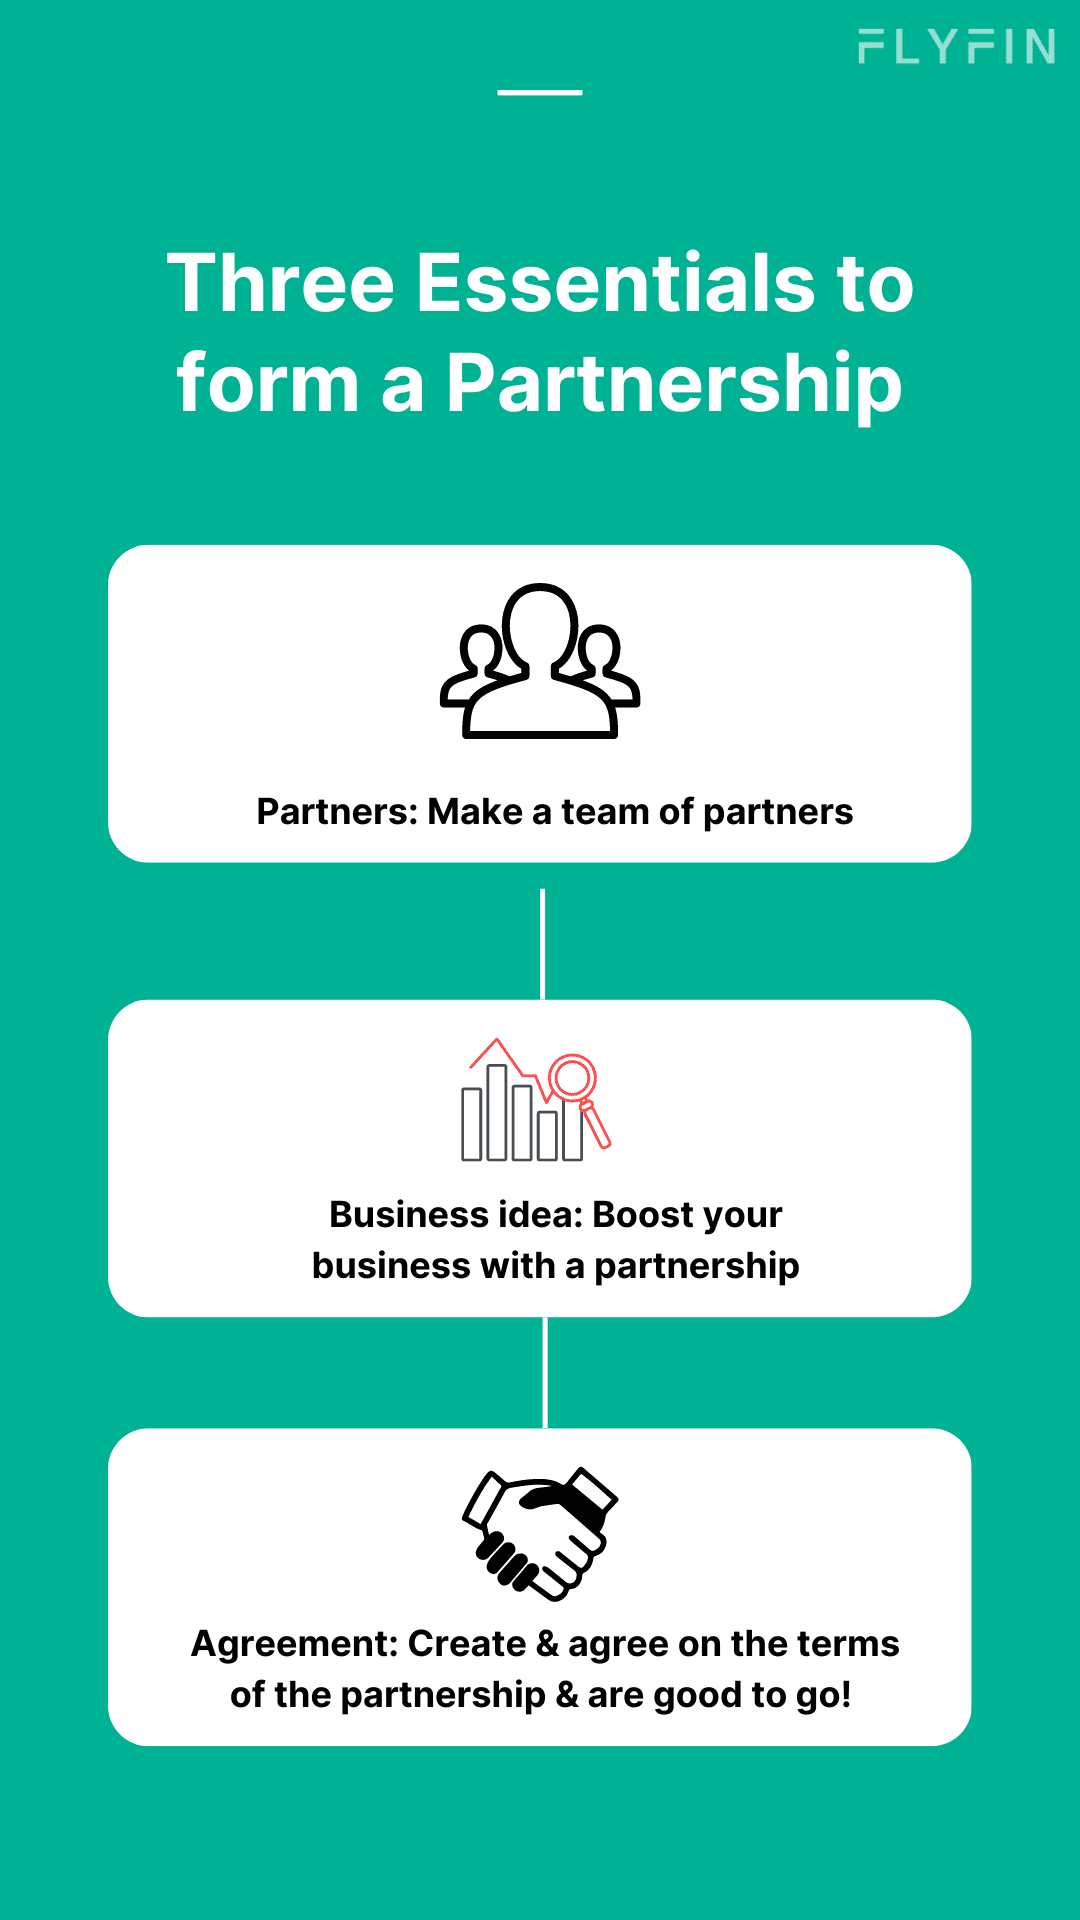 Image with text explaining the three essentials to form a partnership - partners, business idea, and agreement. Useful for entrepreneurs and small business owners. No mention of self employed, 1099, freelancer, or taxes.